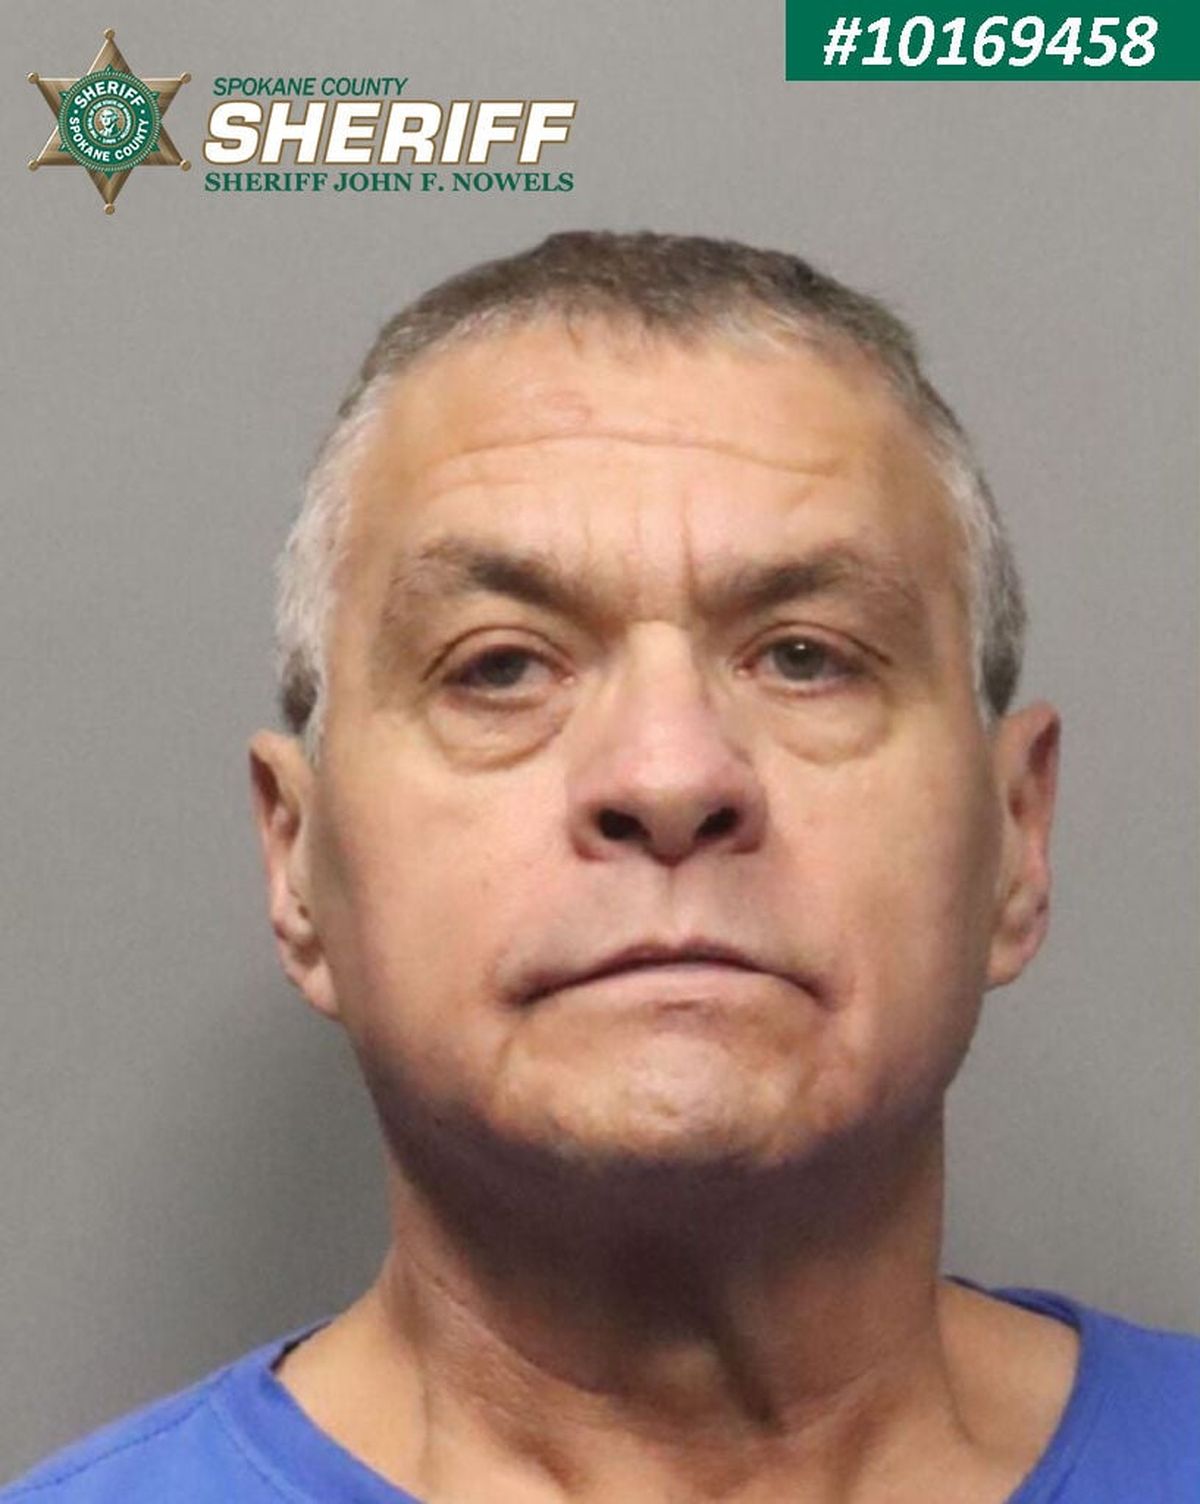 Spokane Valley Police asked the public for more information on 61-year-old Patrick "Joseph" Cabeza after they arrested him on suspicion of child molestation.  (Courtesy of the Spokane County Sheriff